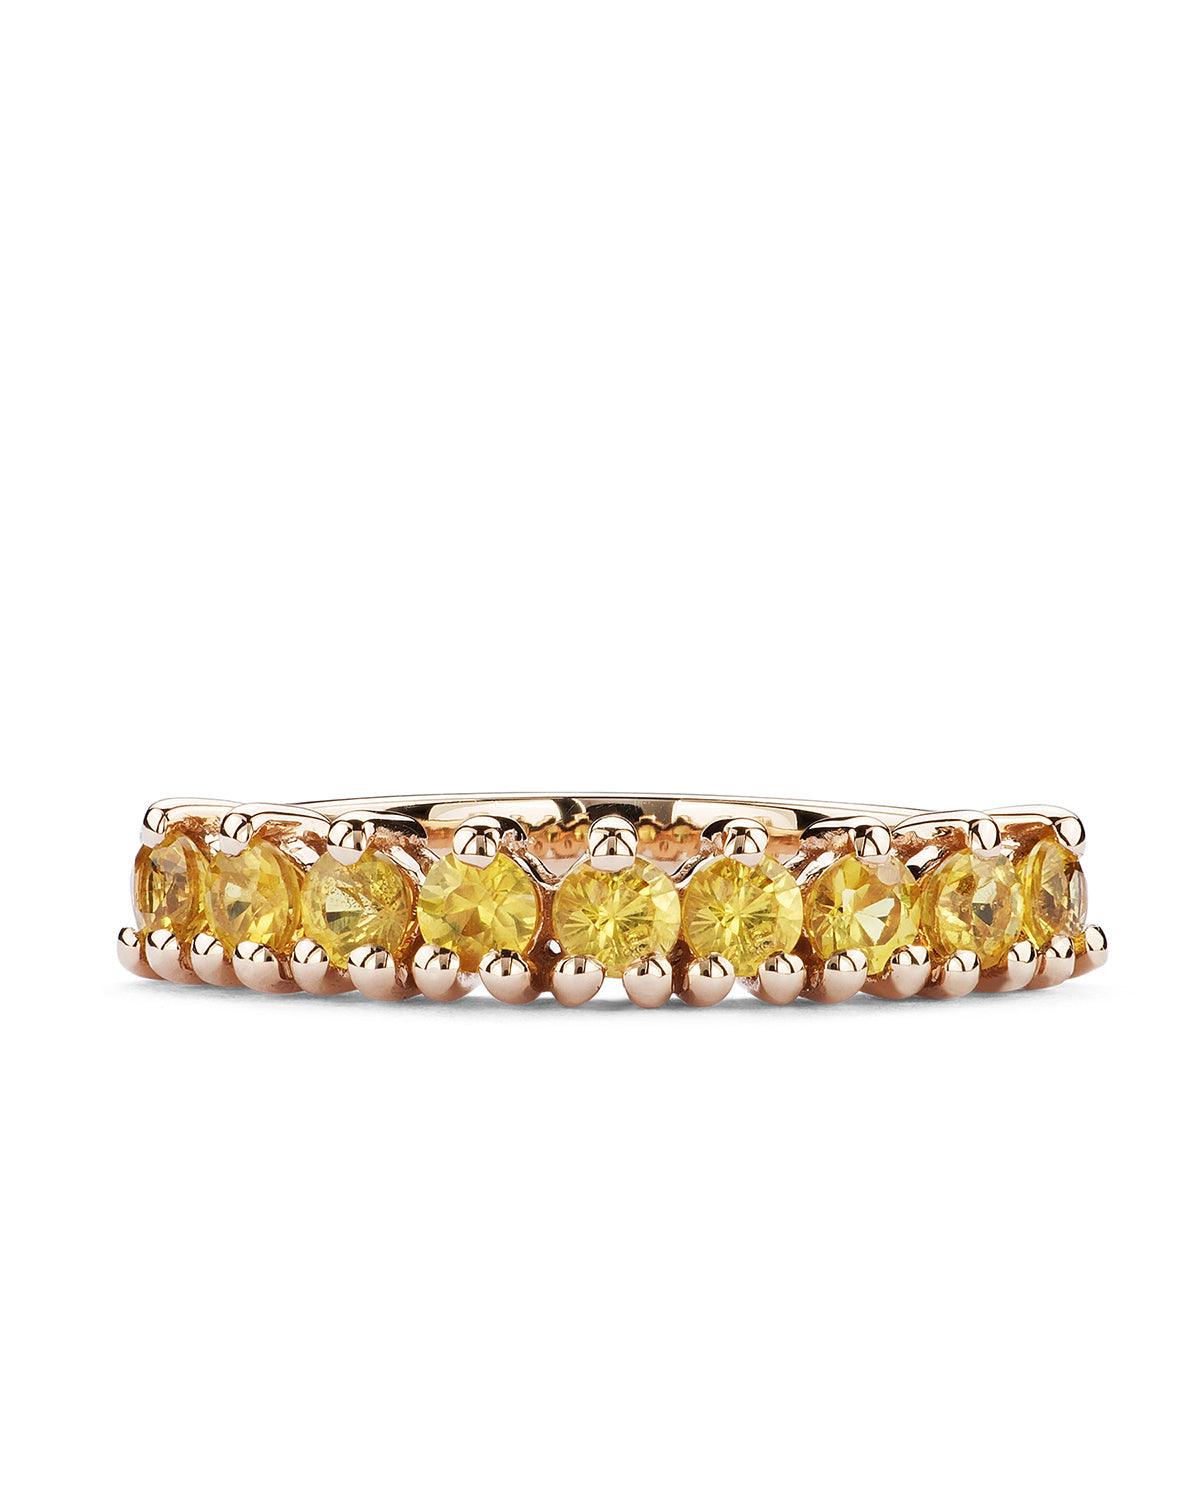 Riviera Ring in Rose Gold With Yellow Sapphires - Moregola Fine Jewelry